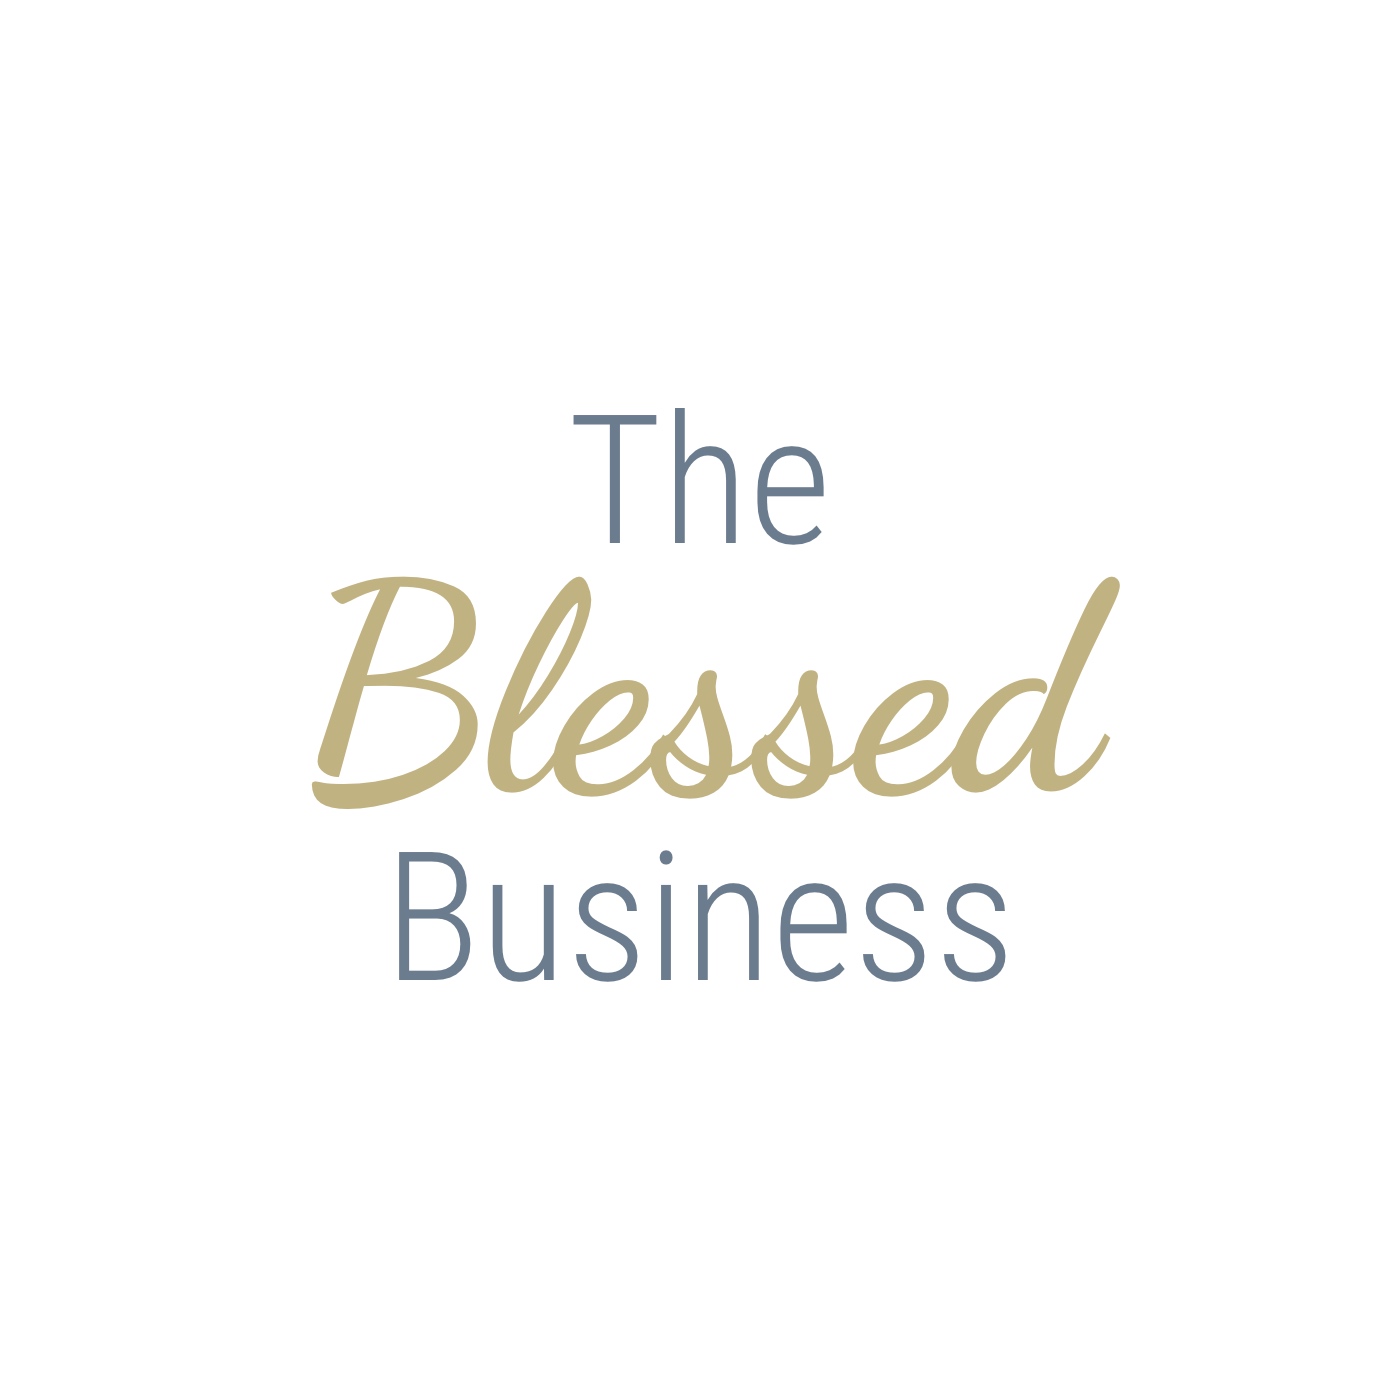 Episode 1: The Blessed Business